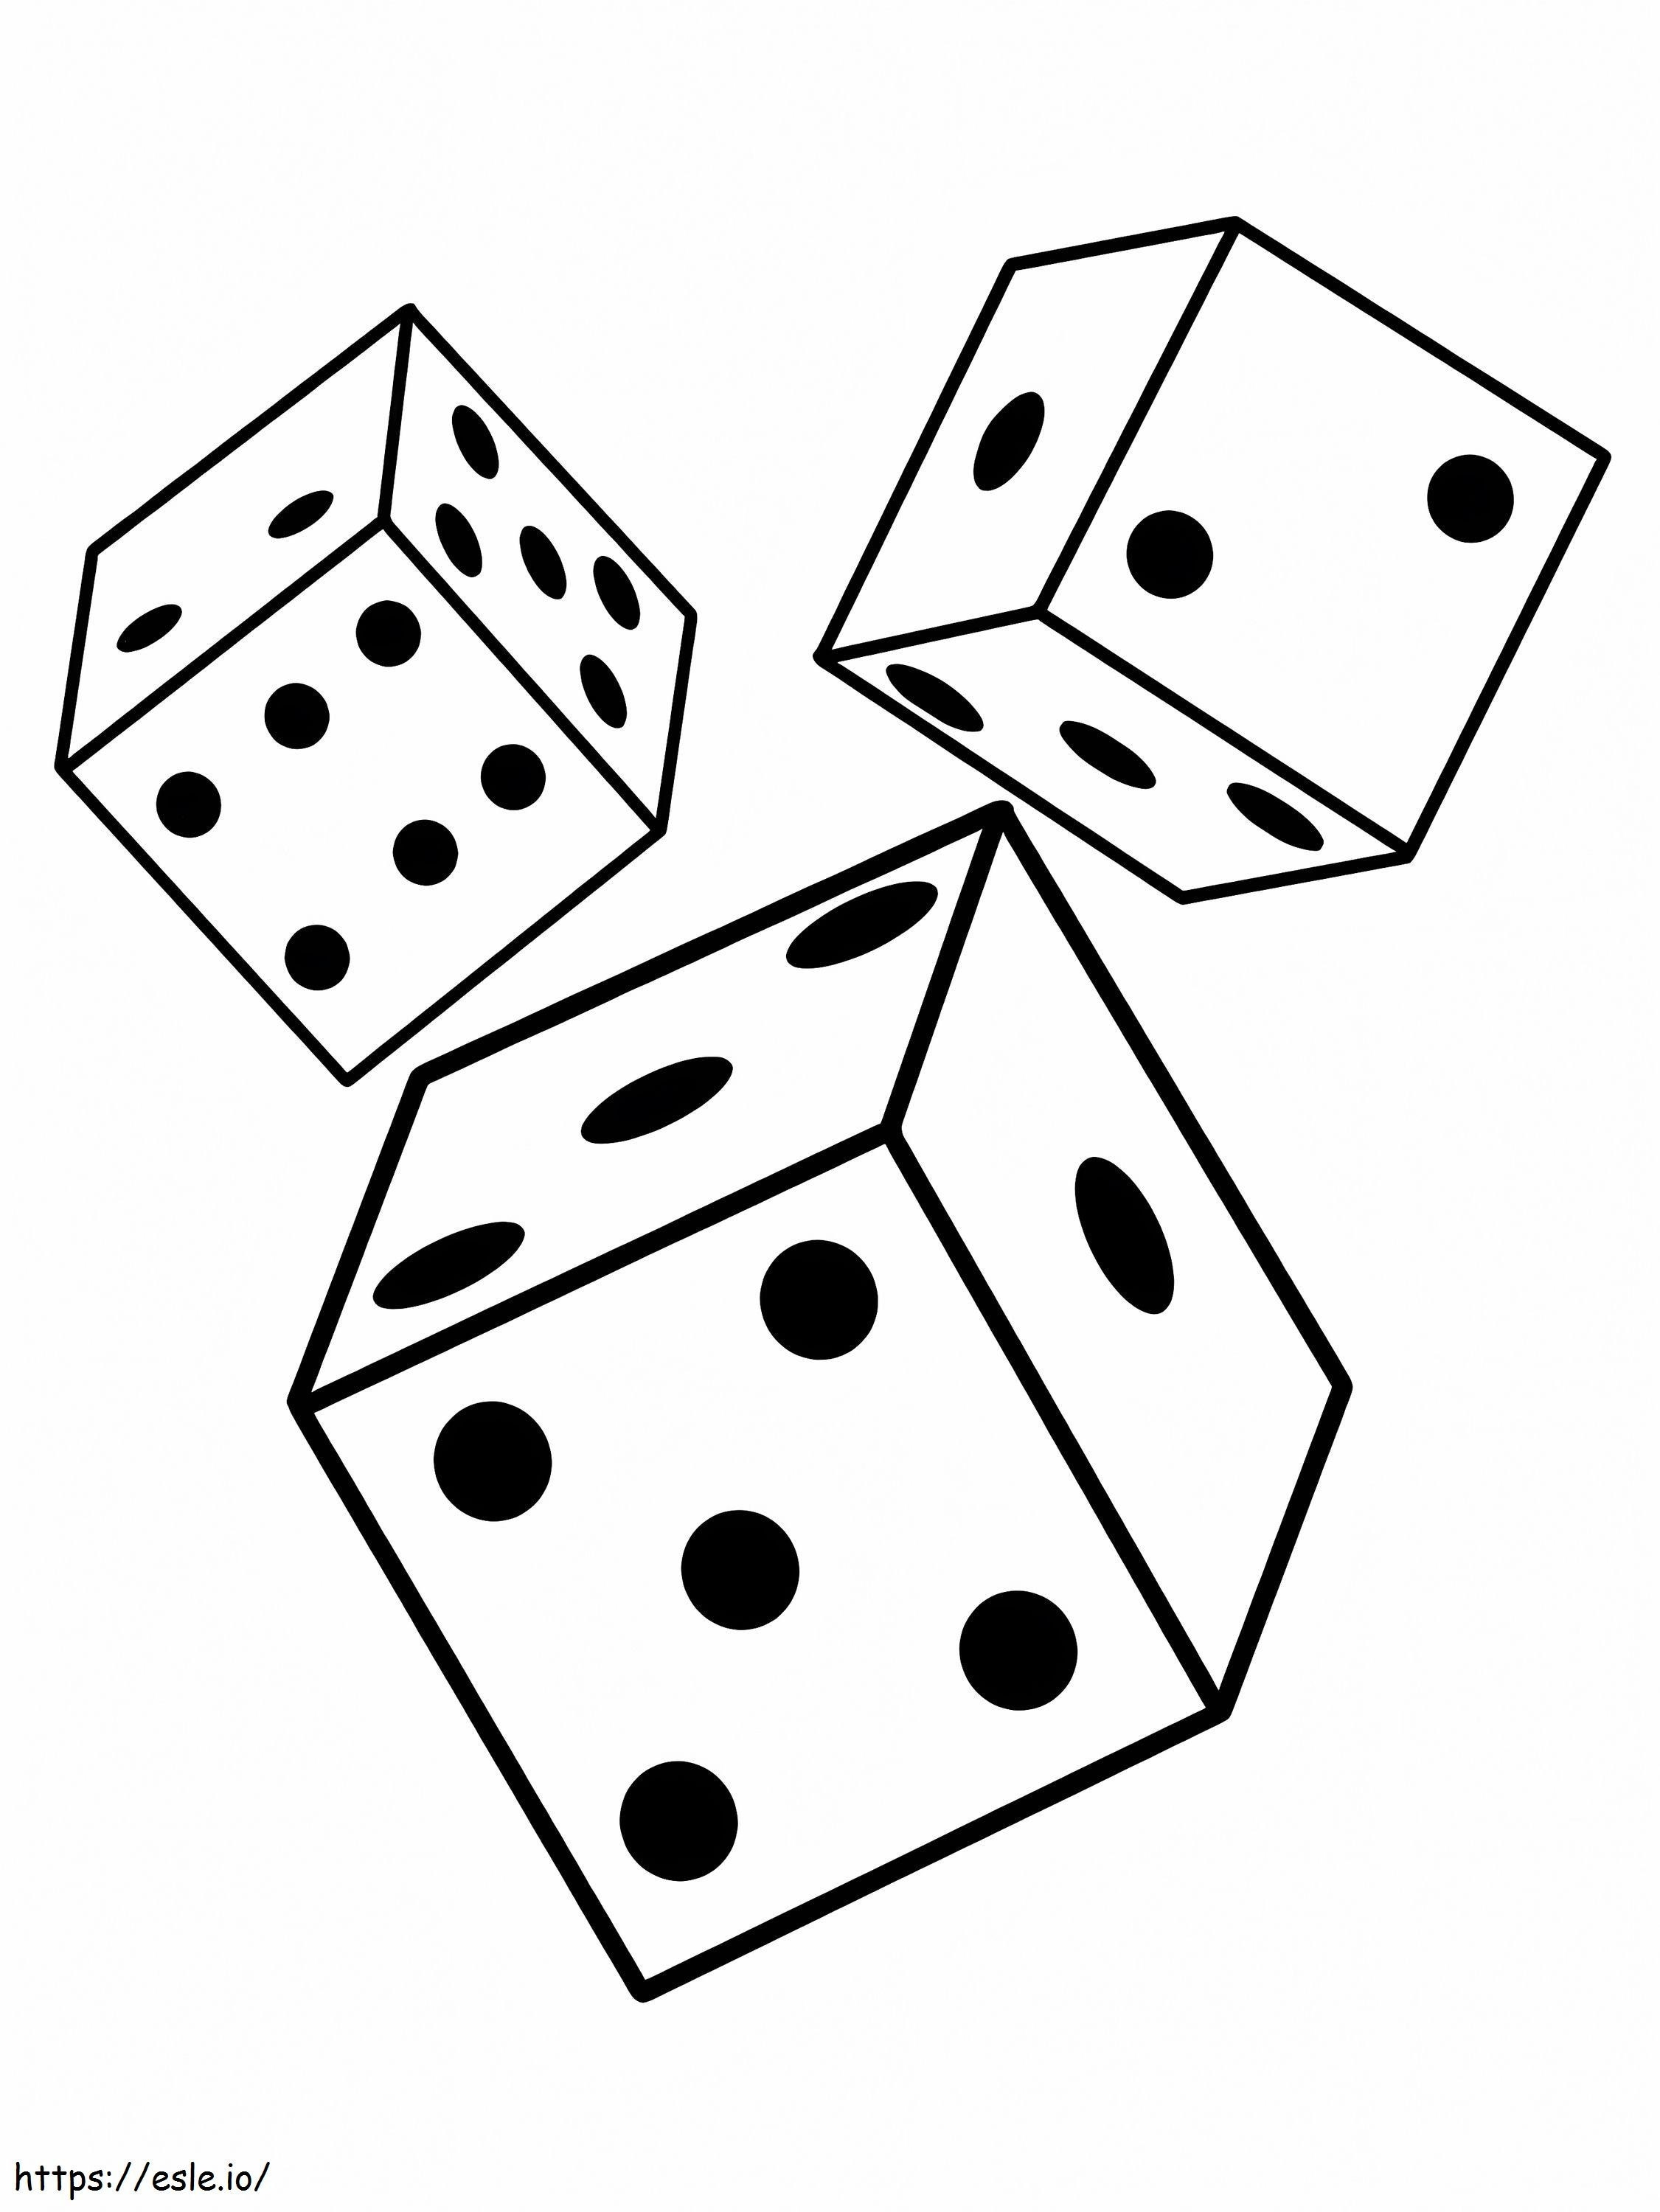 Free Dice coloring page